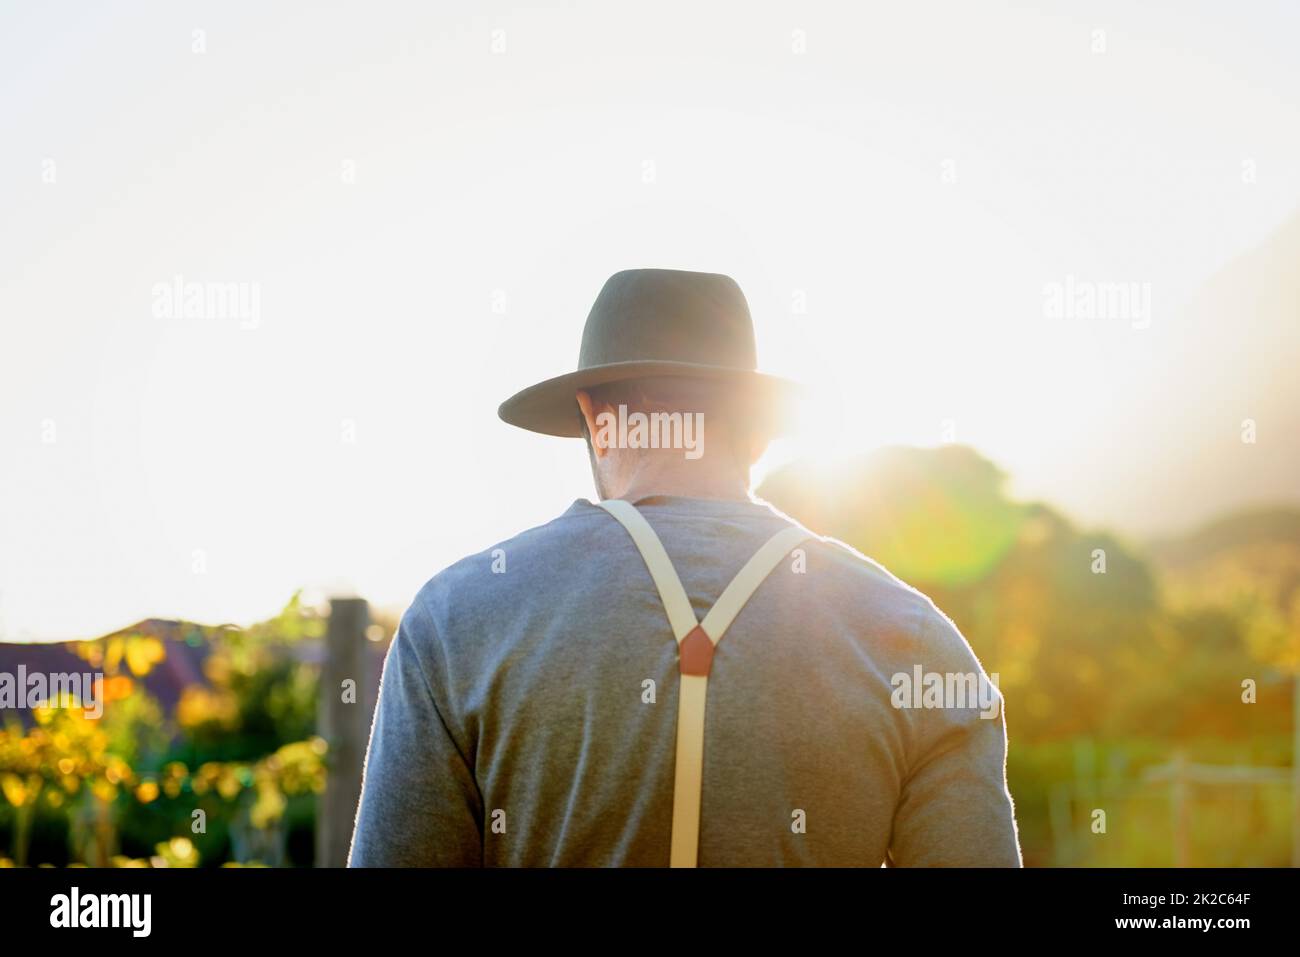 Into the garden he goes. Rearview shot of a man working on a farm. Stock Photo